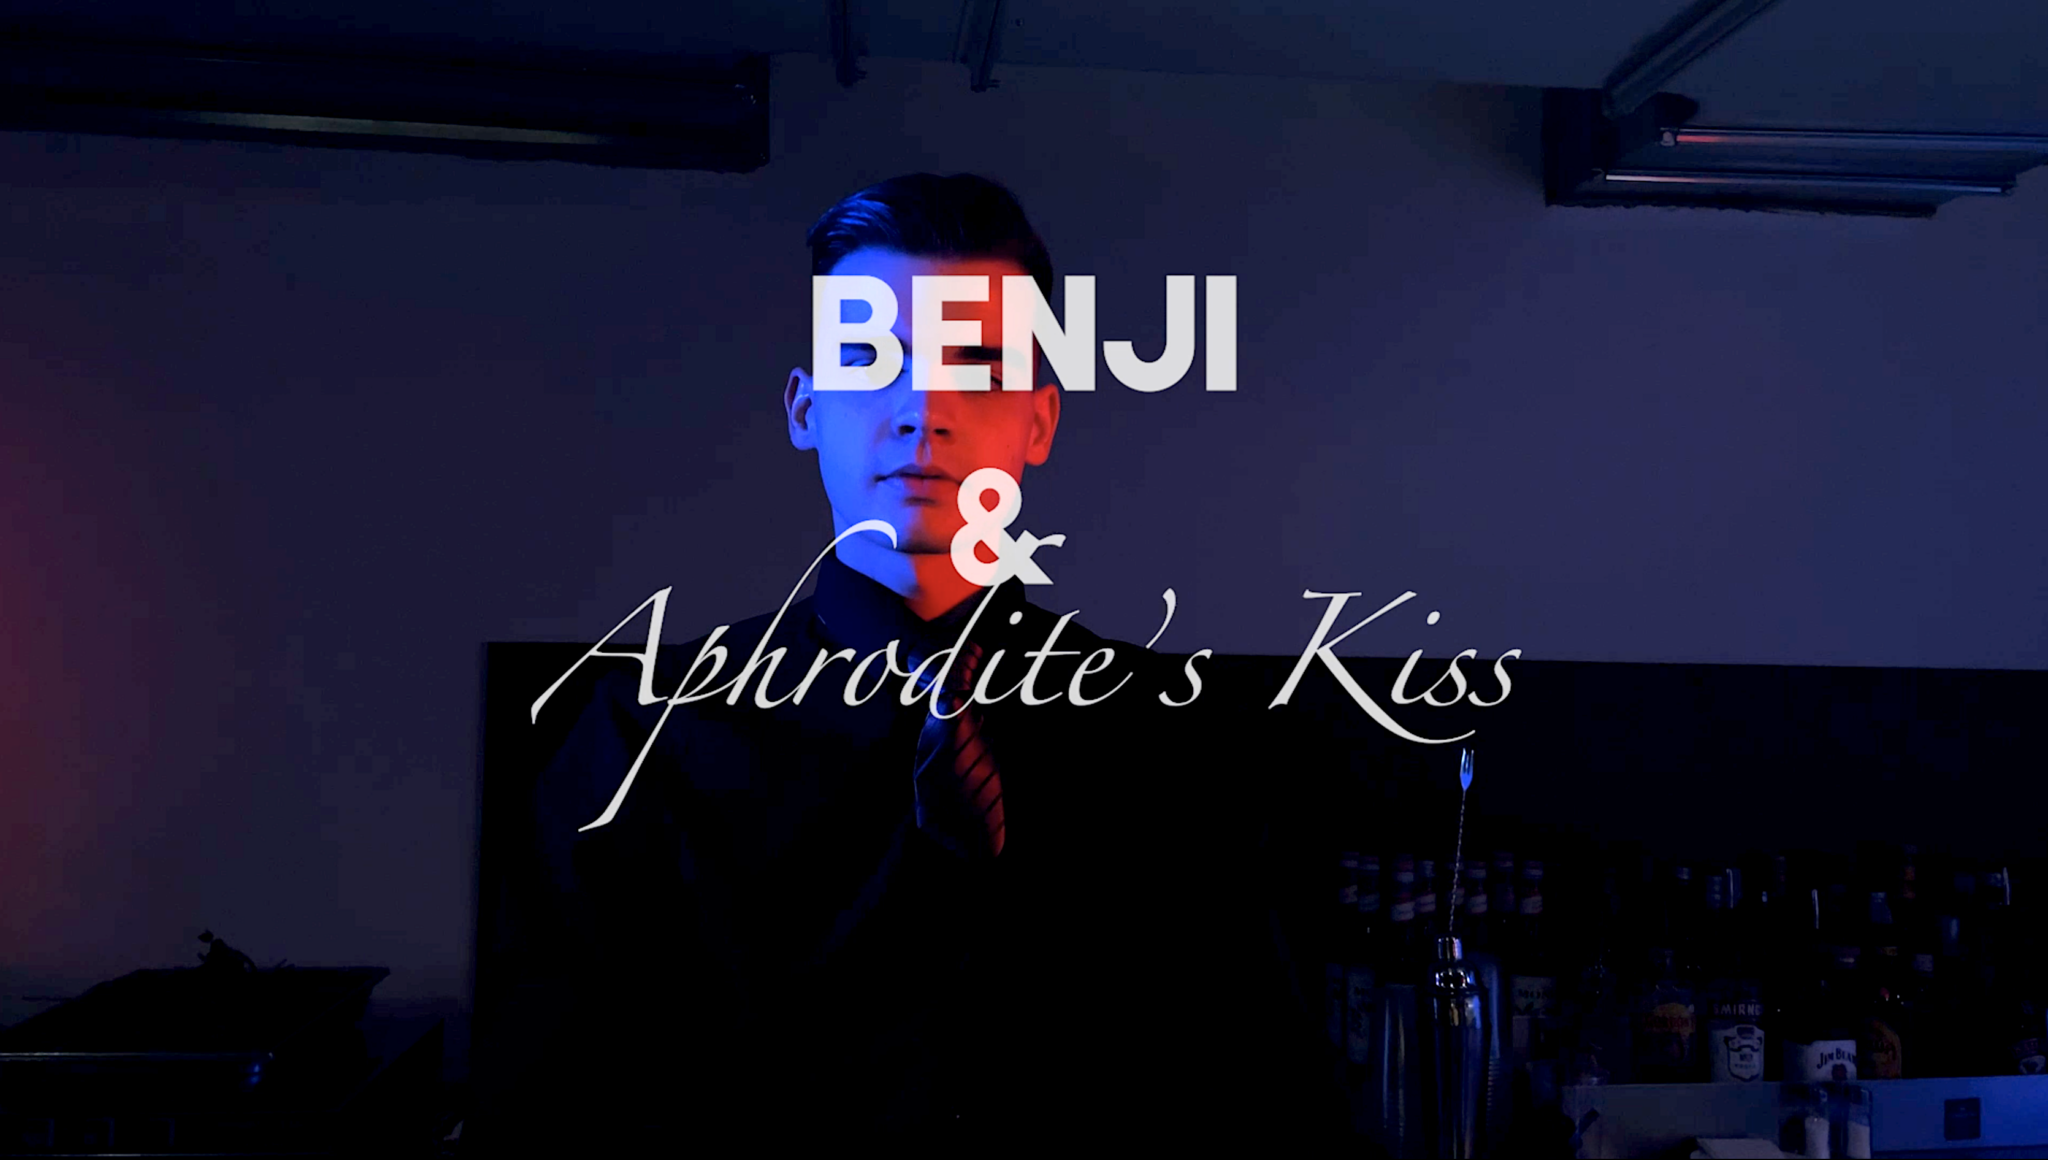 A new cocktail creation at HTMi Switzerland: An Aphrodite’s Kiss